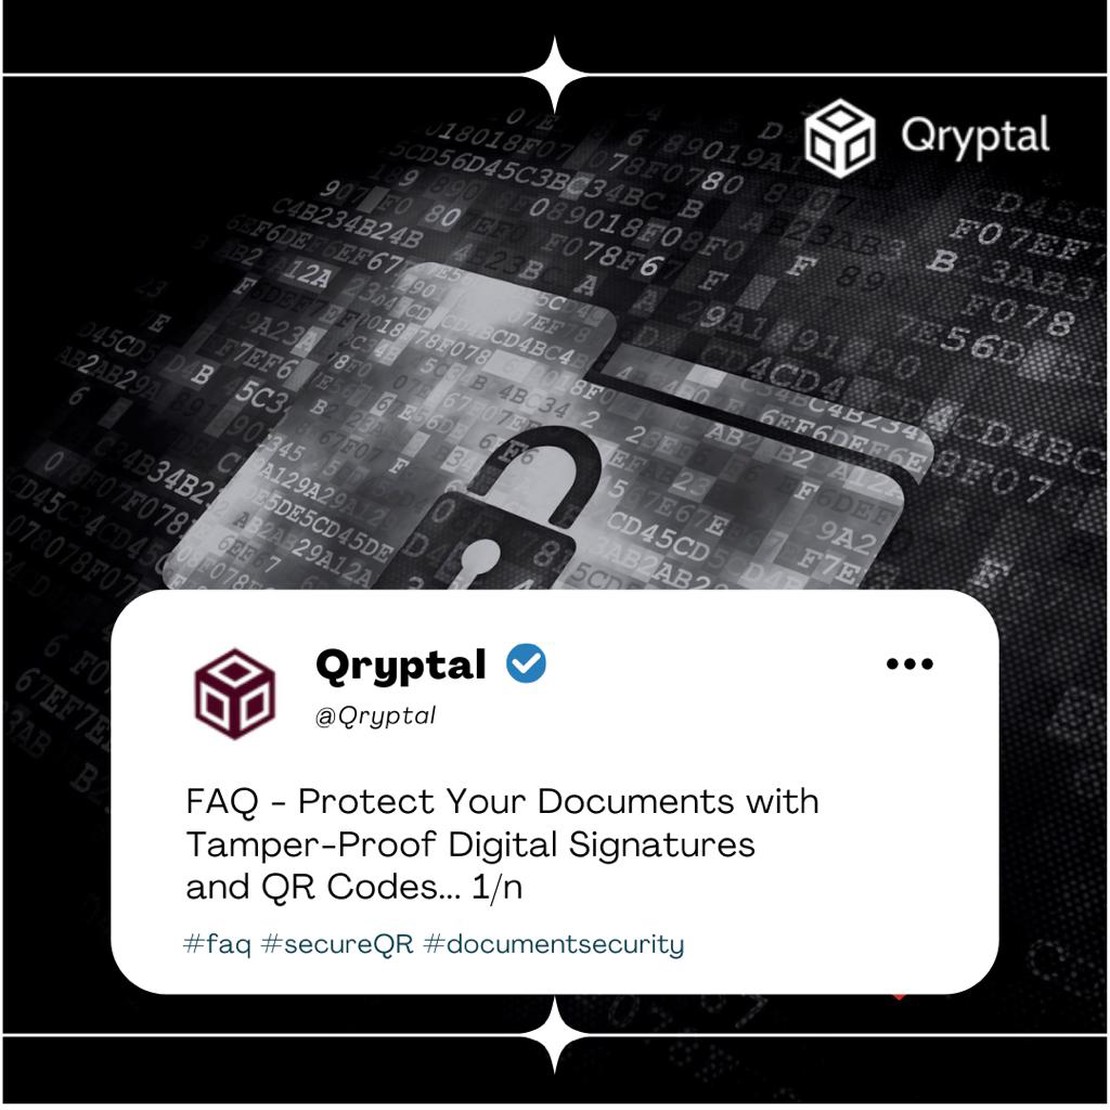 Secure and Verifiable Document Solutions with Qryptal Secure QR Code Technology